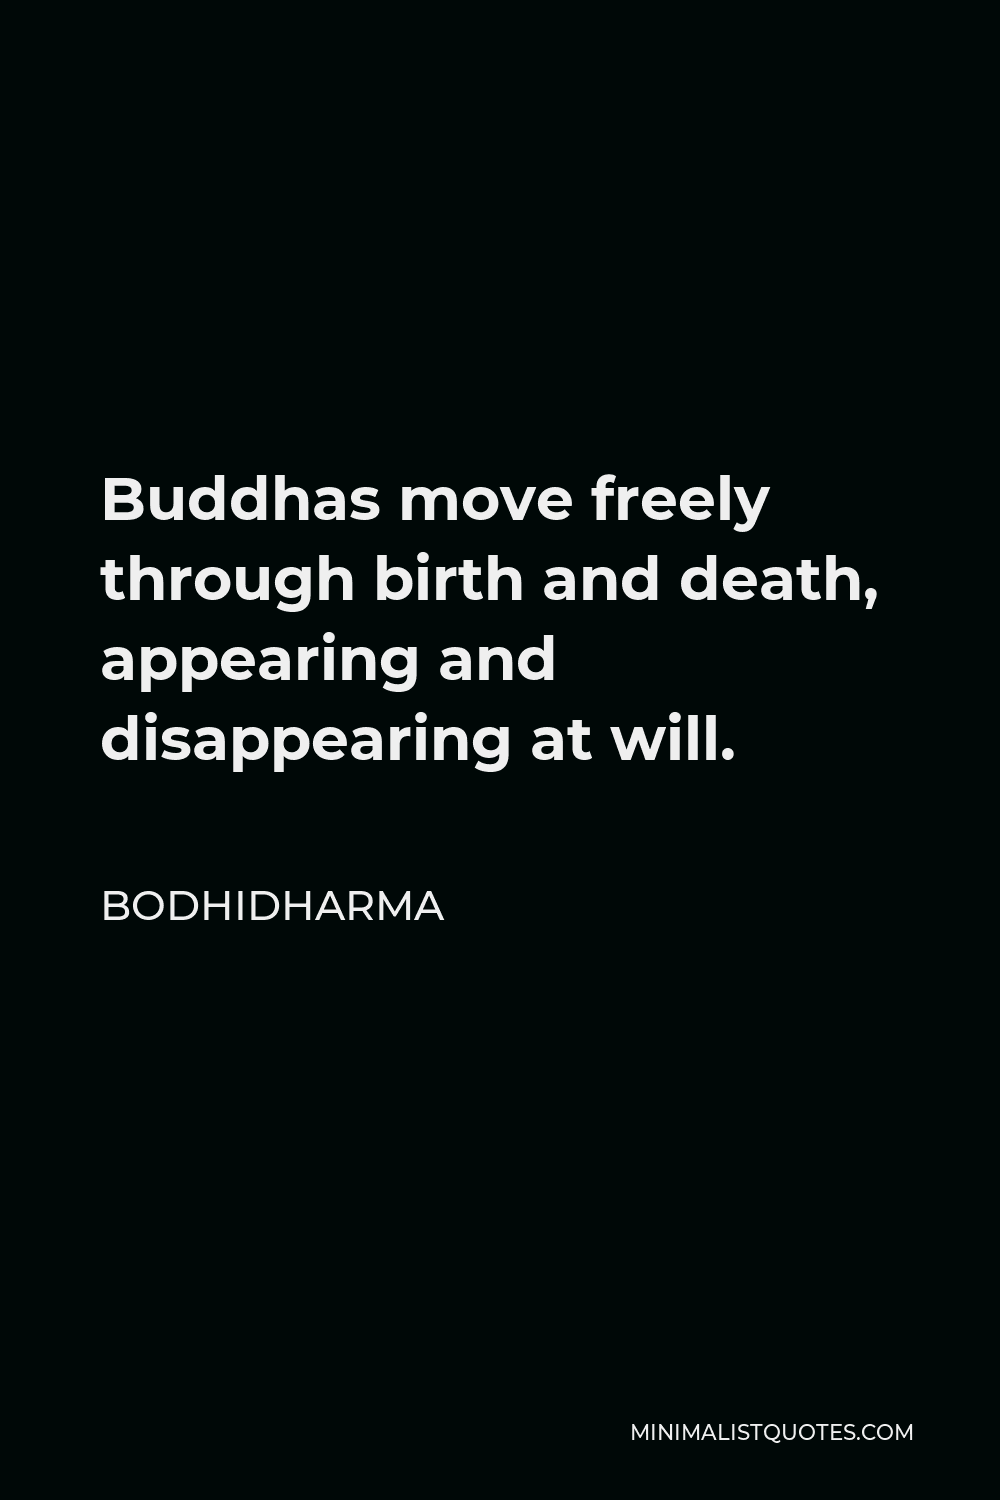 Bodhidharma Quote - Buddhas move freely through birth and death, appearing and disappearing at will.